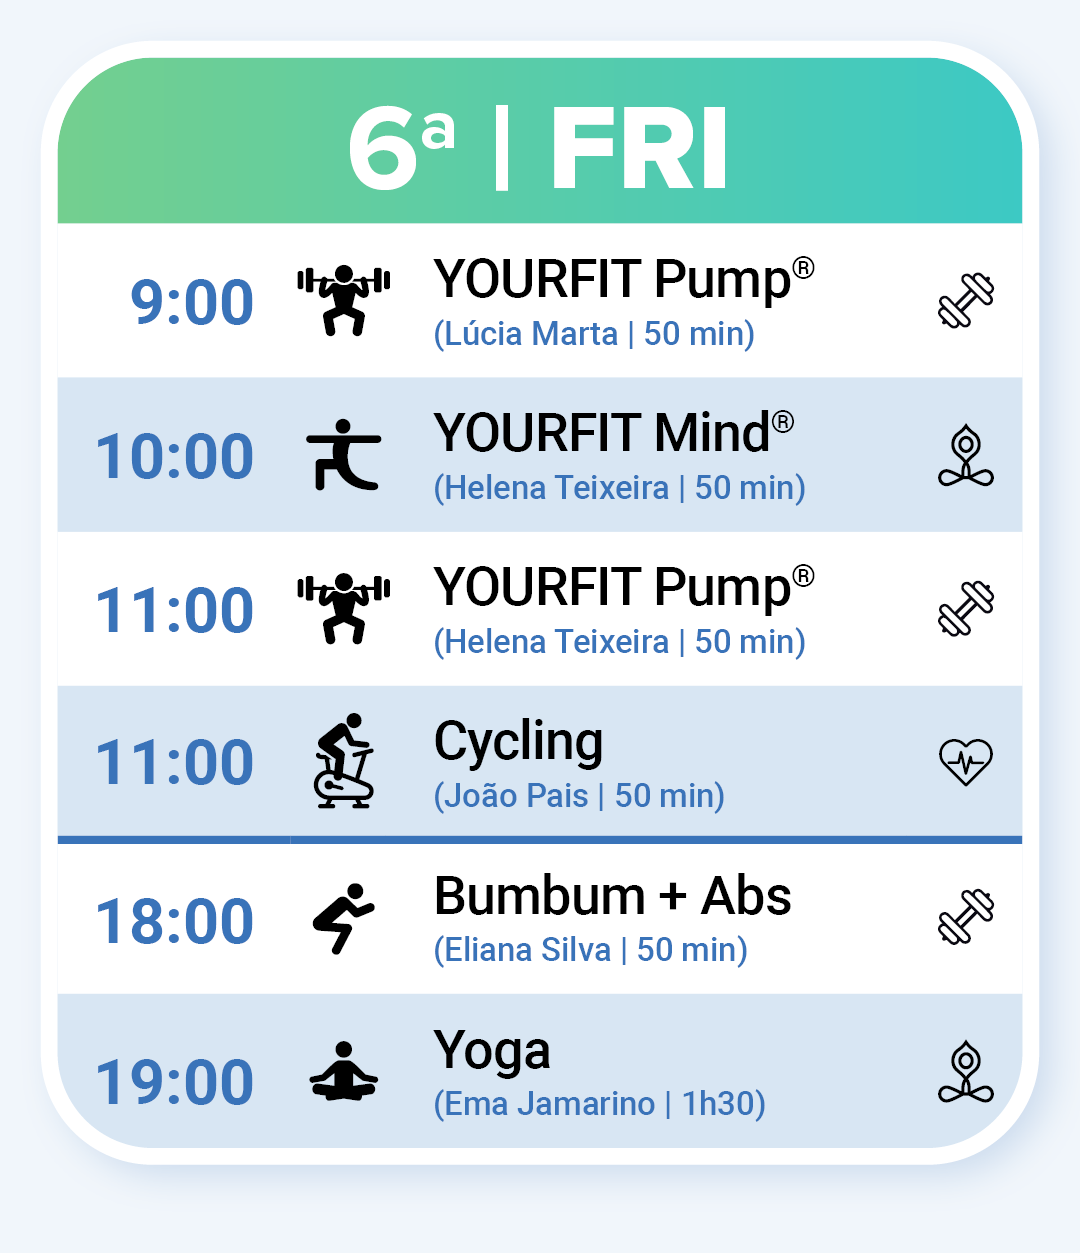 Fitness Classes on Friday: YOURFIT Pump, YOURFIT Mind, Cycling, BumBum + Abs and Yoga.